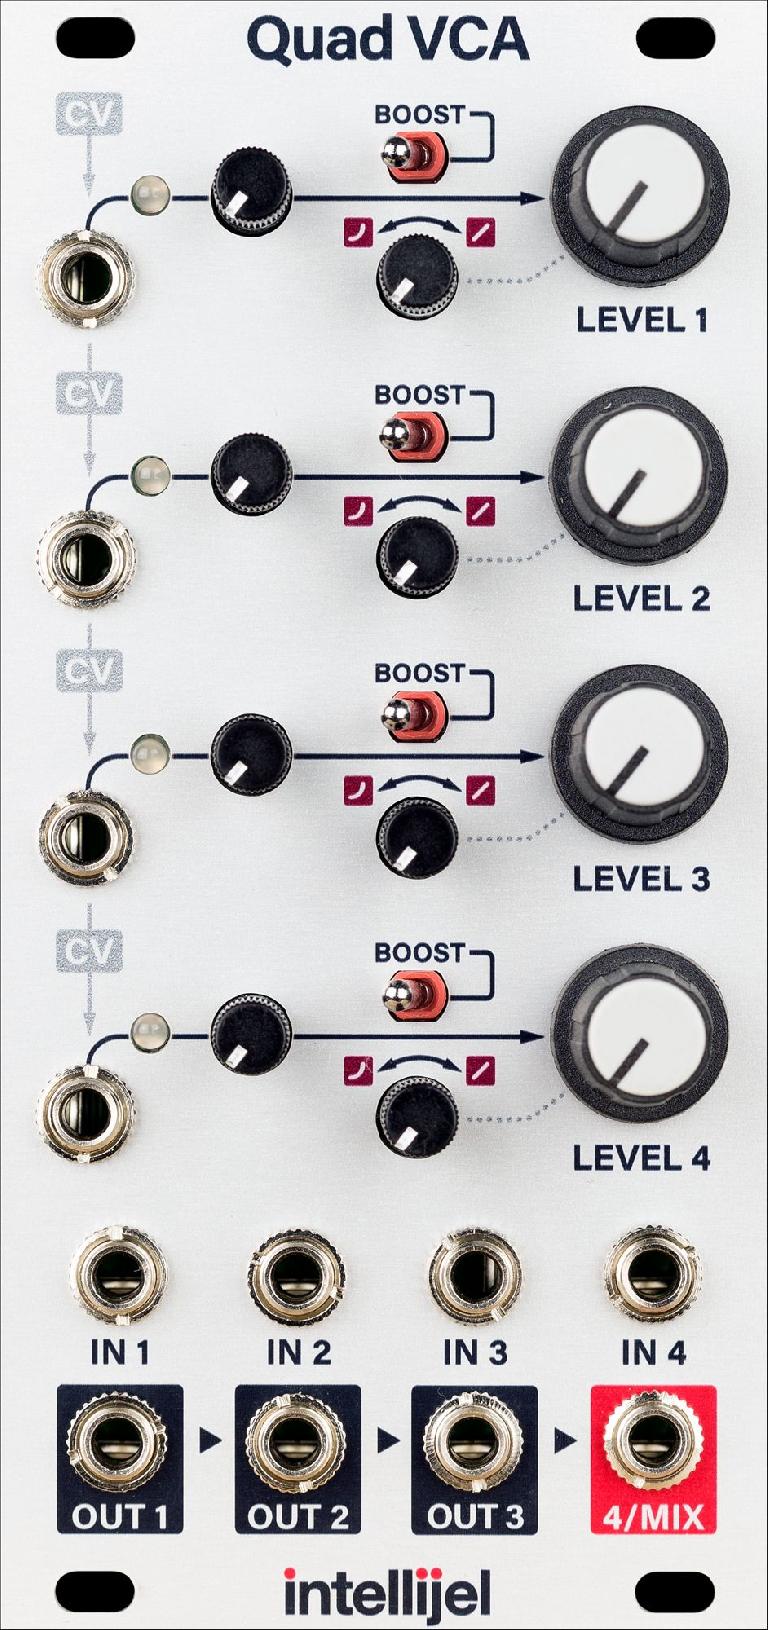 Intellijel’s Quad VCA maximizes HP with its clever architecture.